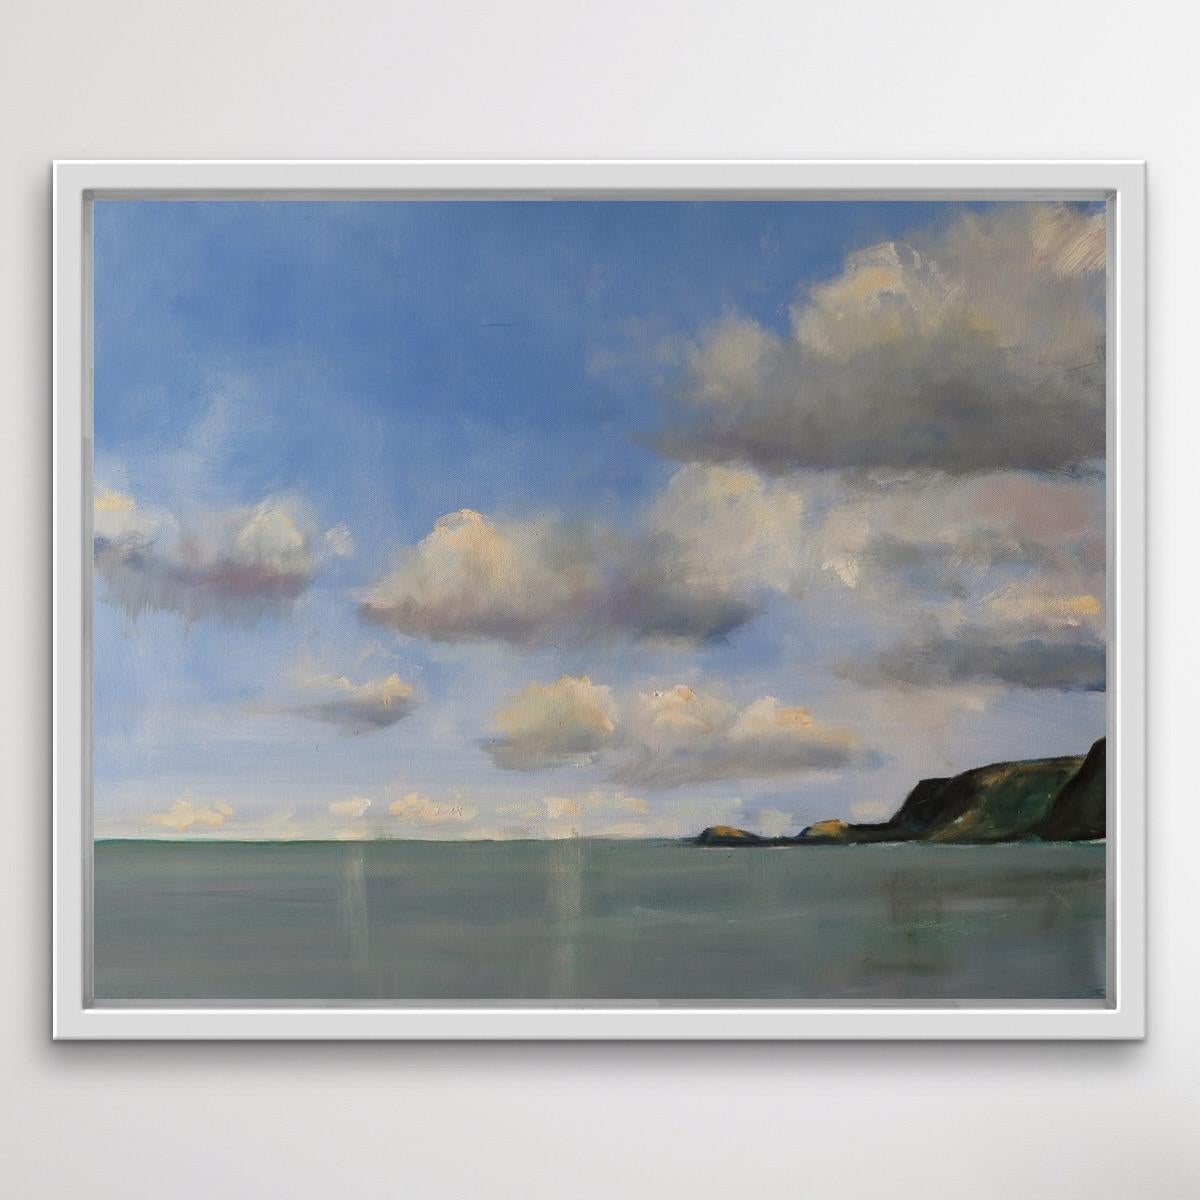 Whitby Clouds [2022]
original
oil on canvas
Image size: H:61 cm x W:76 cm
Complete Size of Unframed Work: H:61 cm x W:76 cm x D:2cm
Sold Unframed
Please note that insitu images are purely an indication of how a piece may look.

'Whitby Clouds' is an